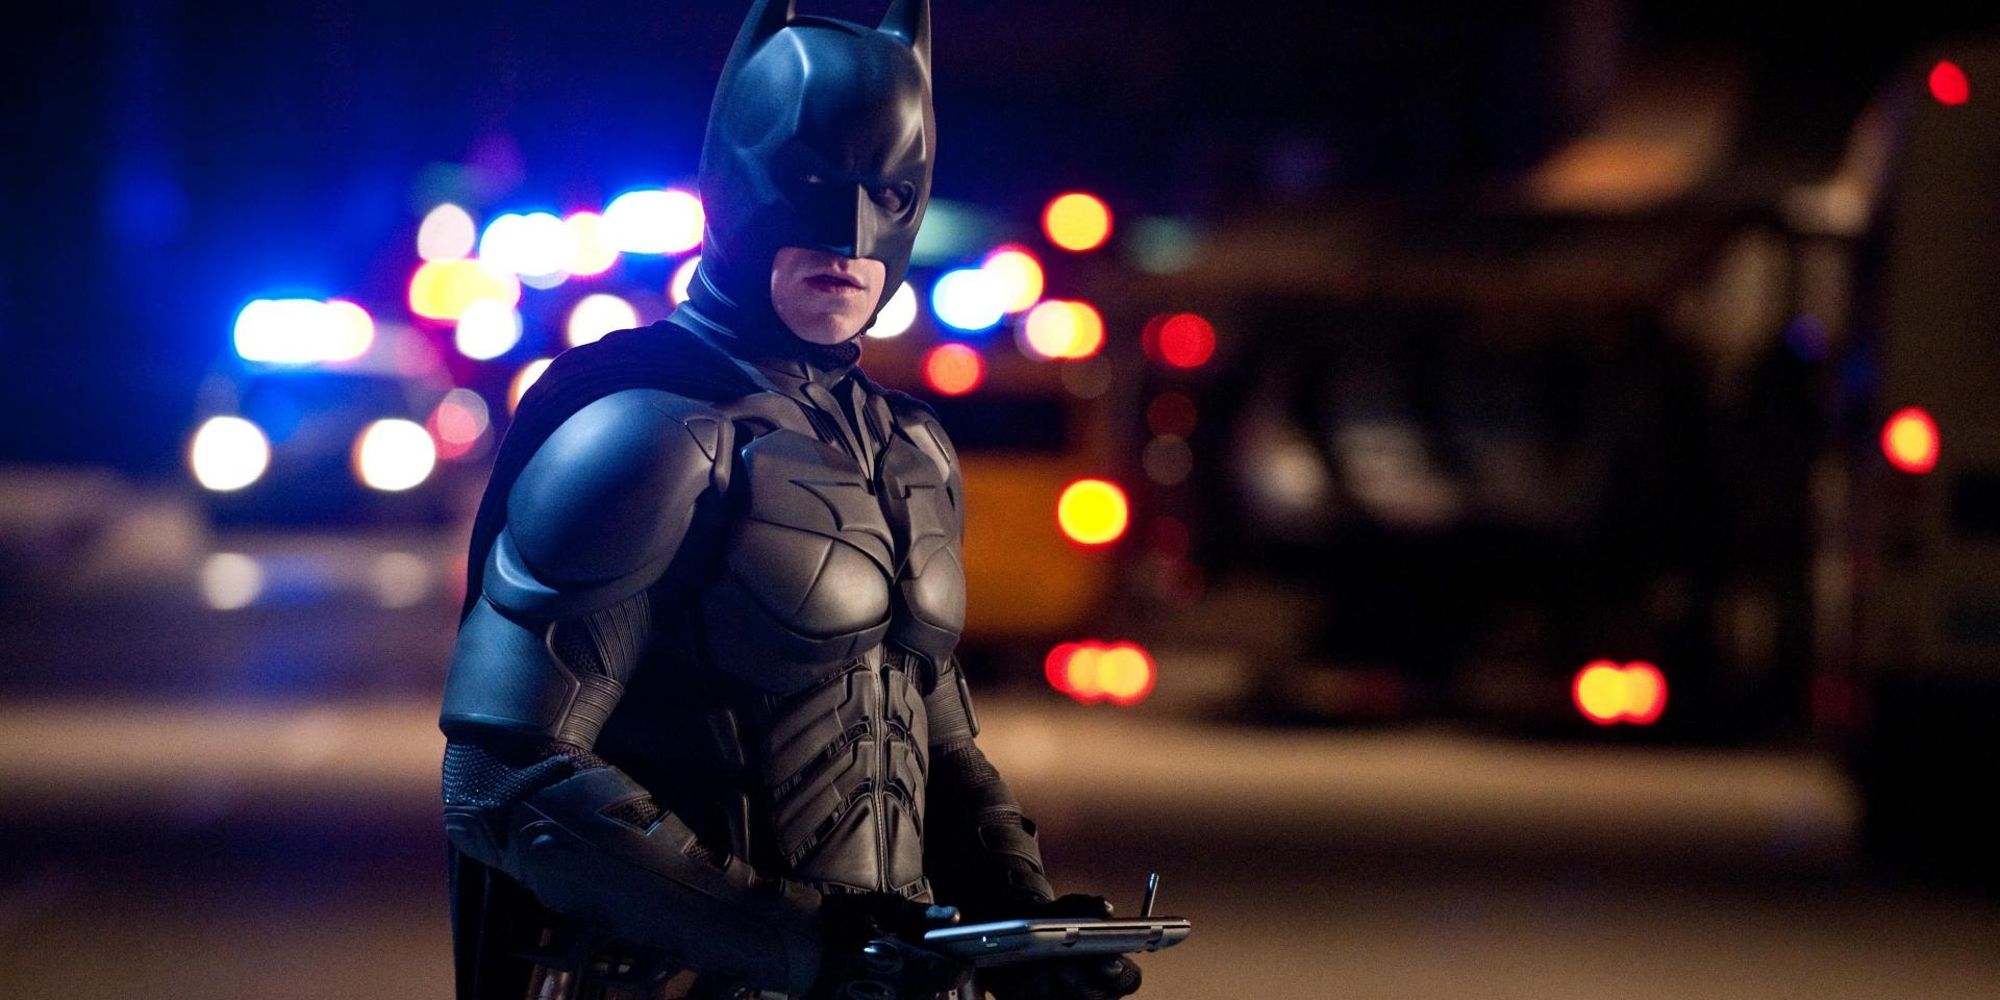 Batman being surrounded by police in The Dark Knight Rises